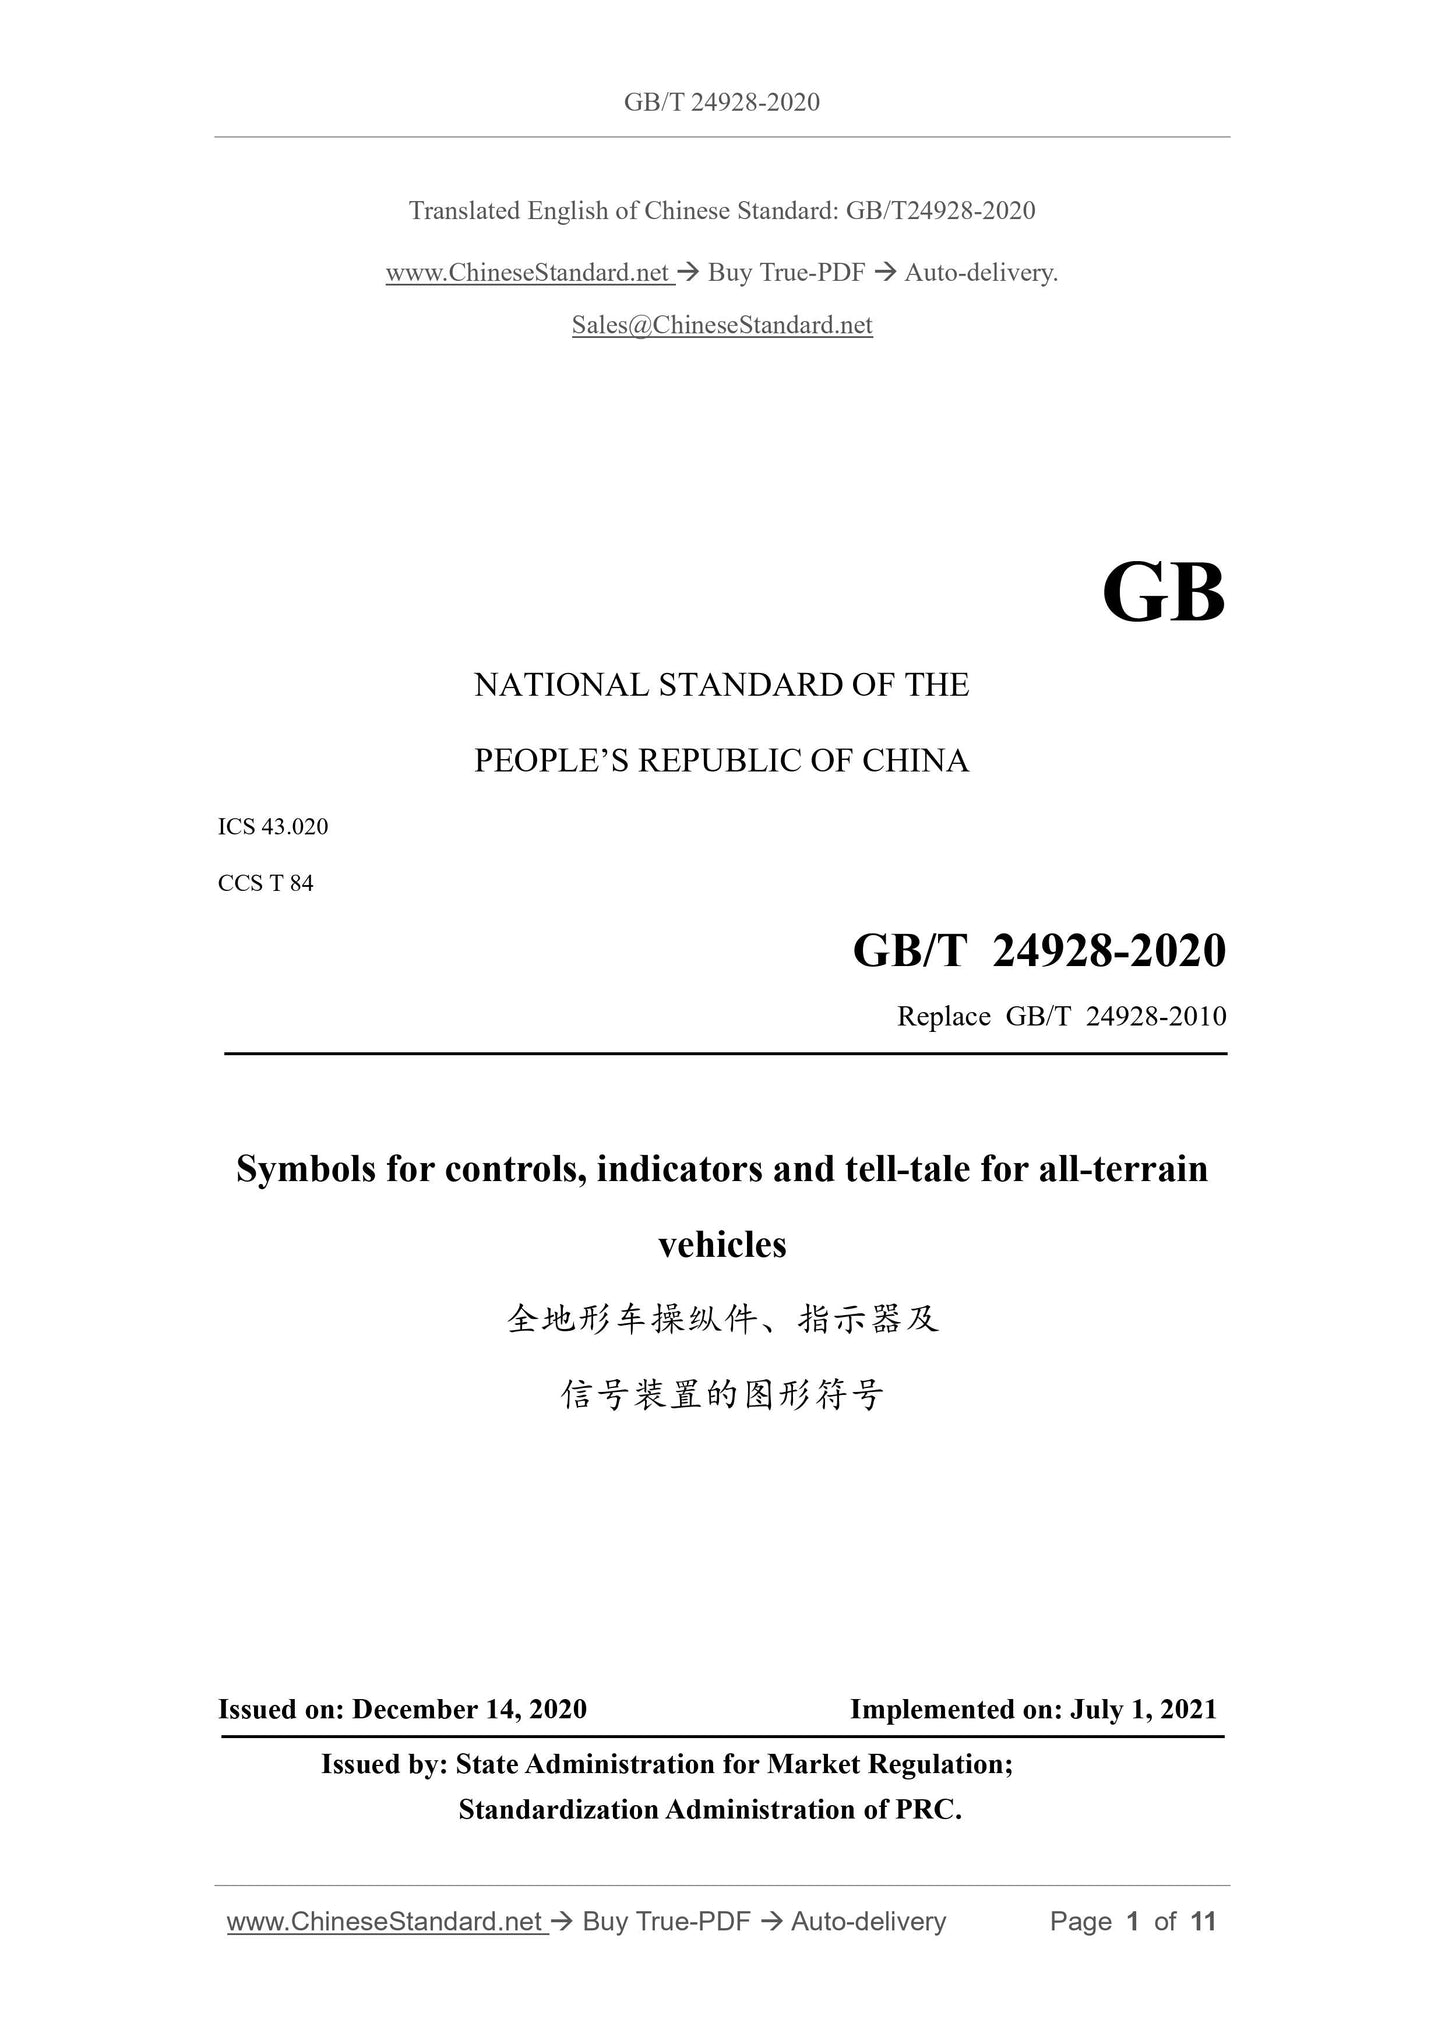 GB/T 24928-2020 Page 1